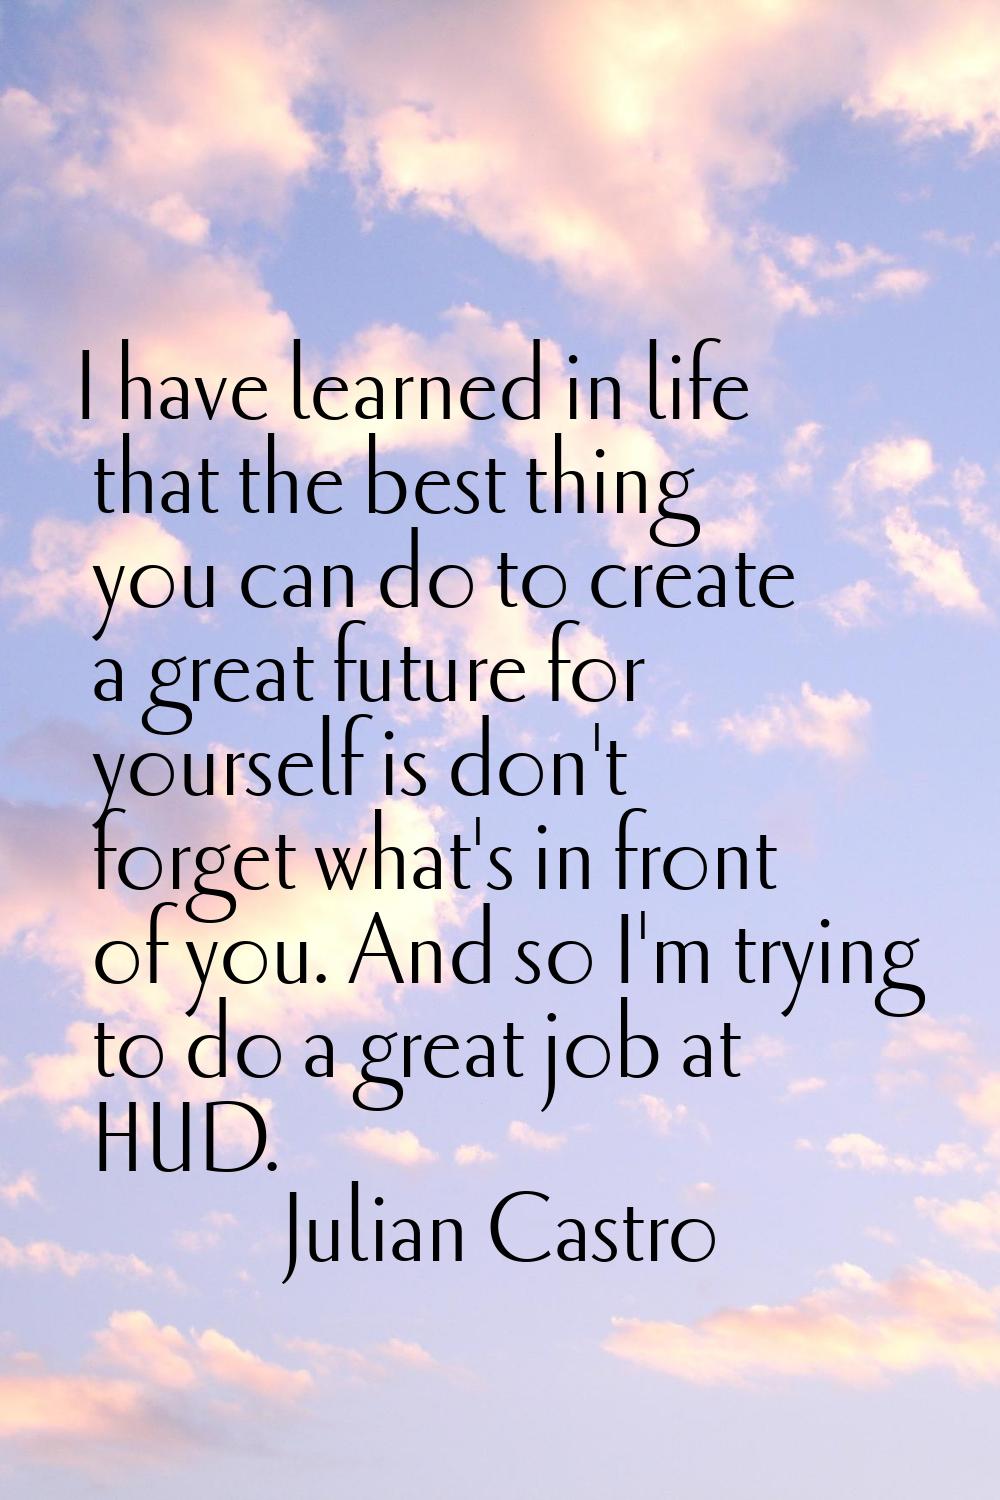 I have learned in life that the best thing you can do to create a great future for yourself is don'